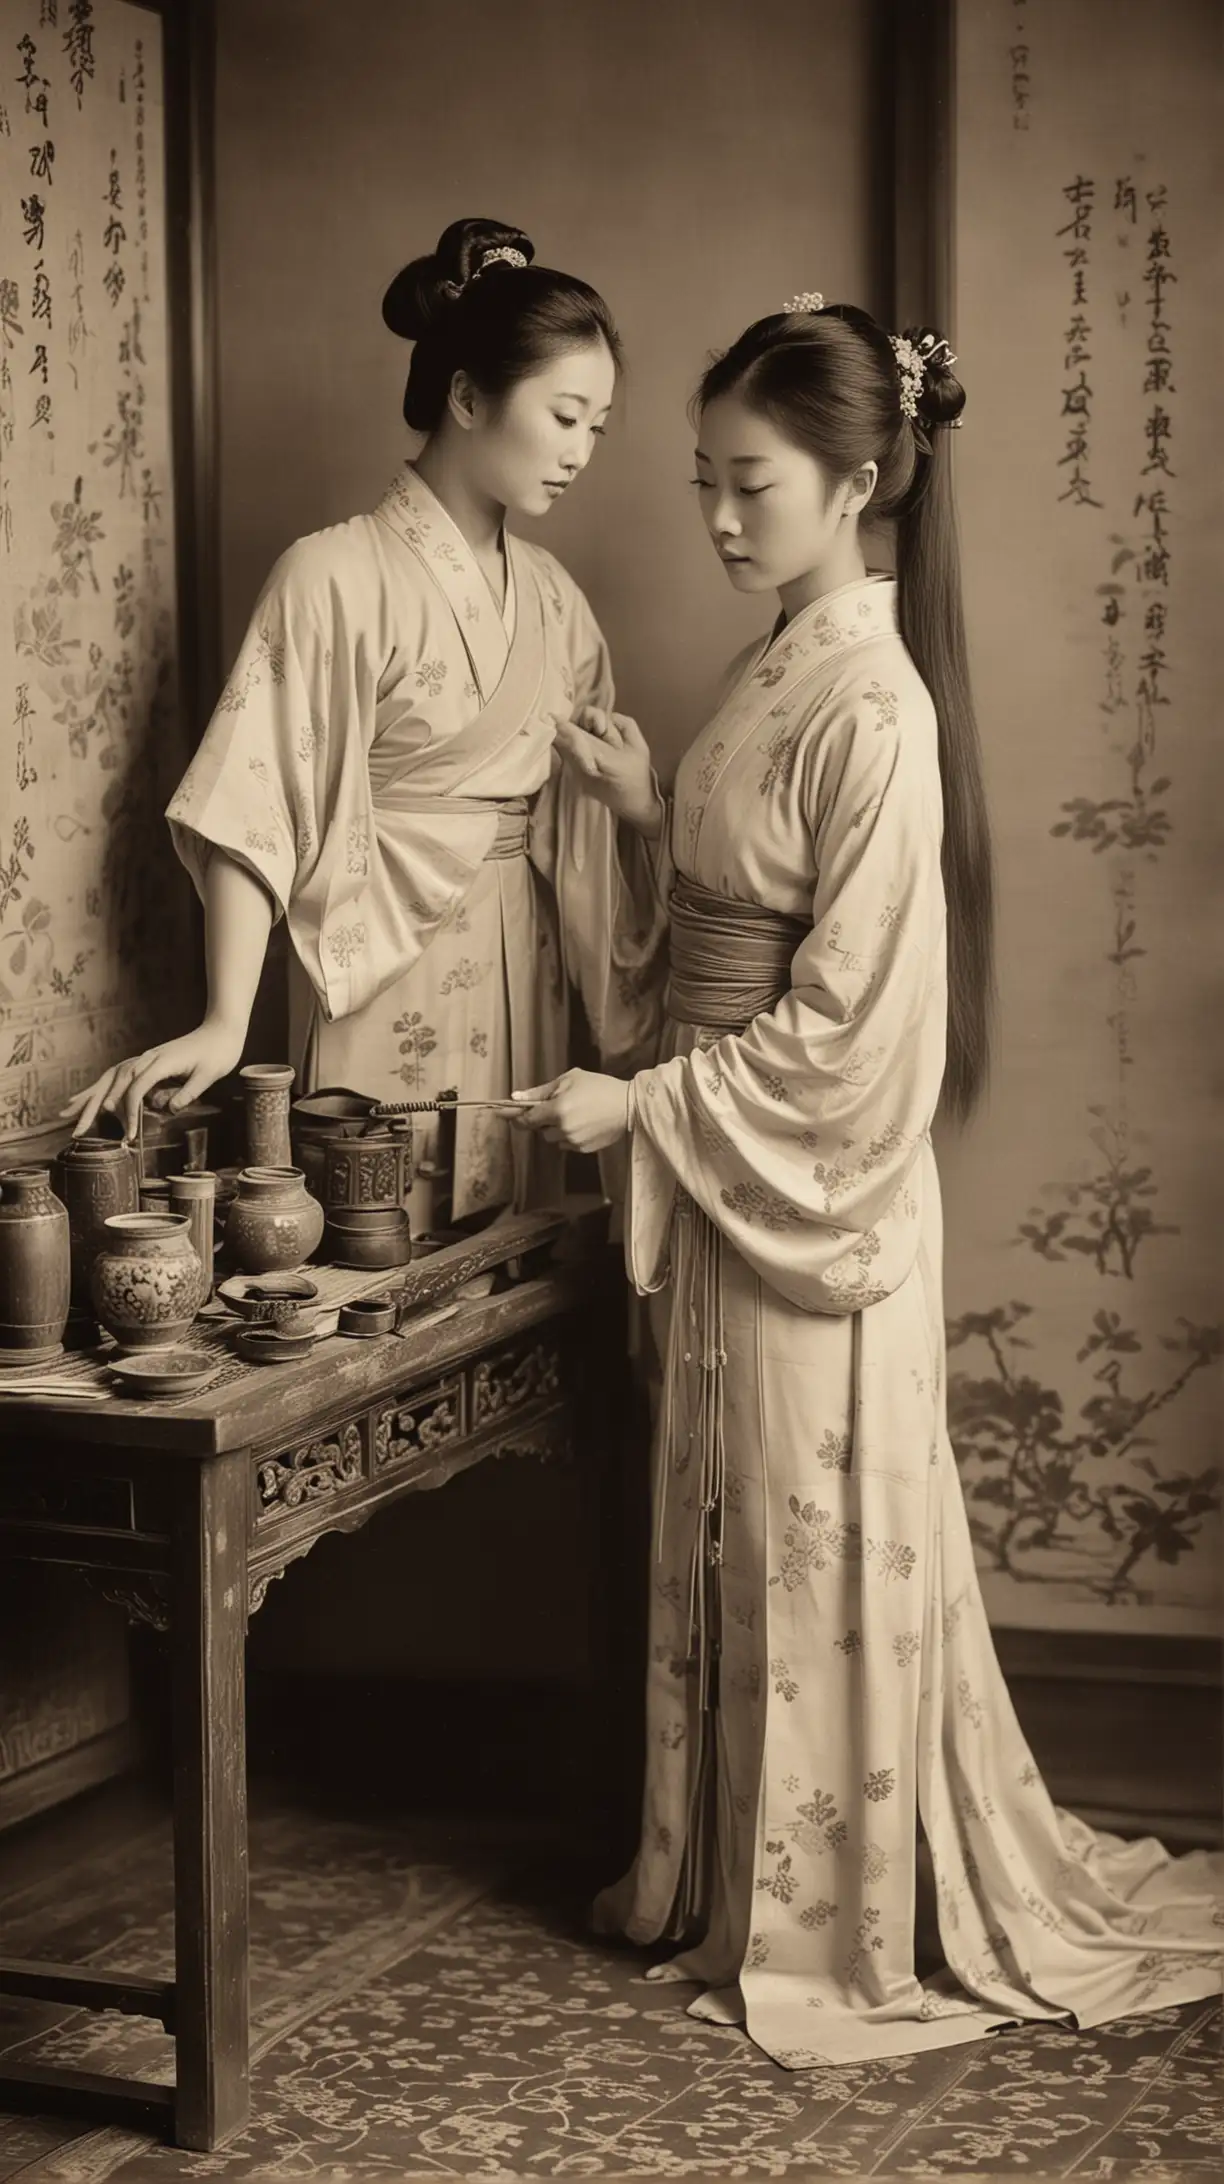 Elegant Chinese Concubines Adorning with Incense in 19th Century Beijing